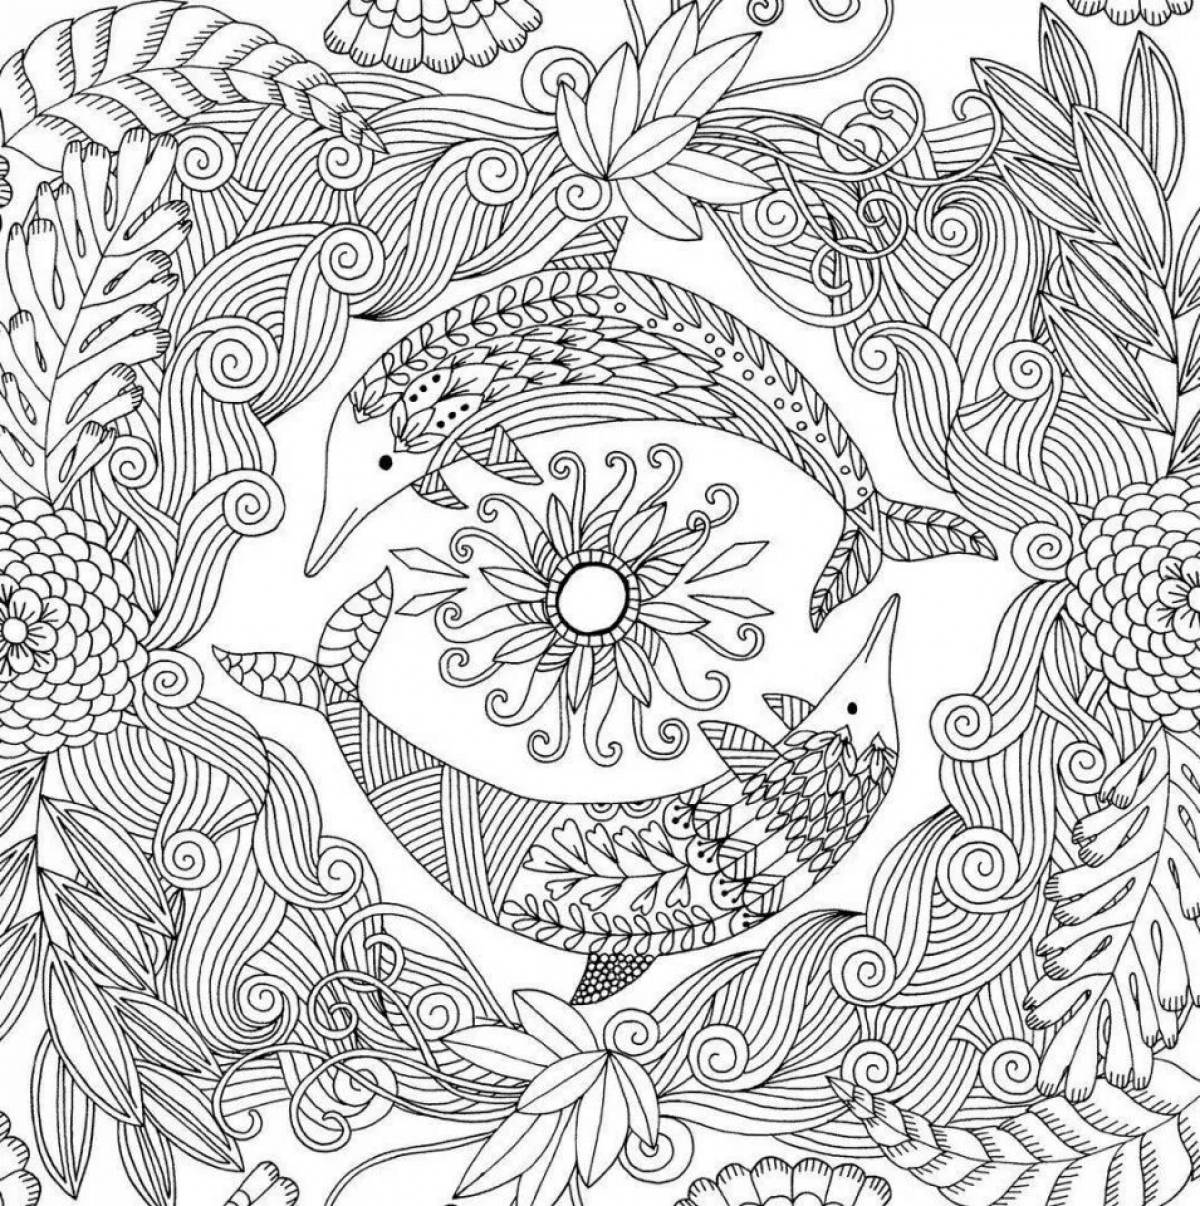 Amusement coloring book relaxation for children